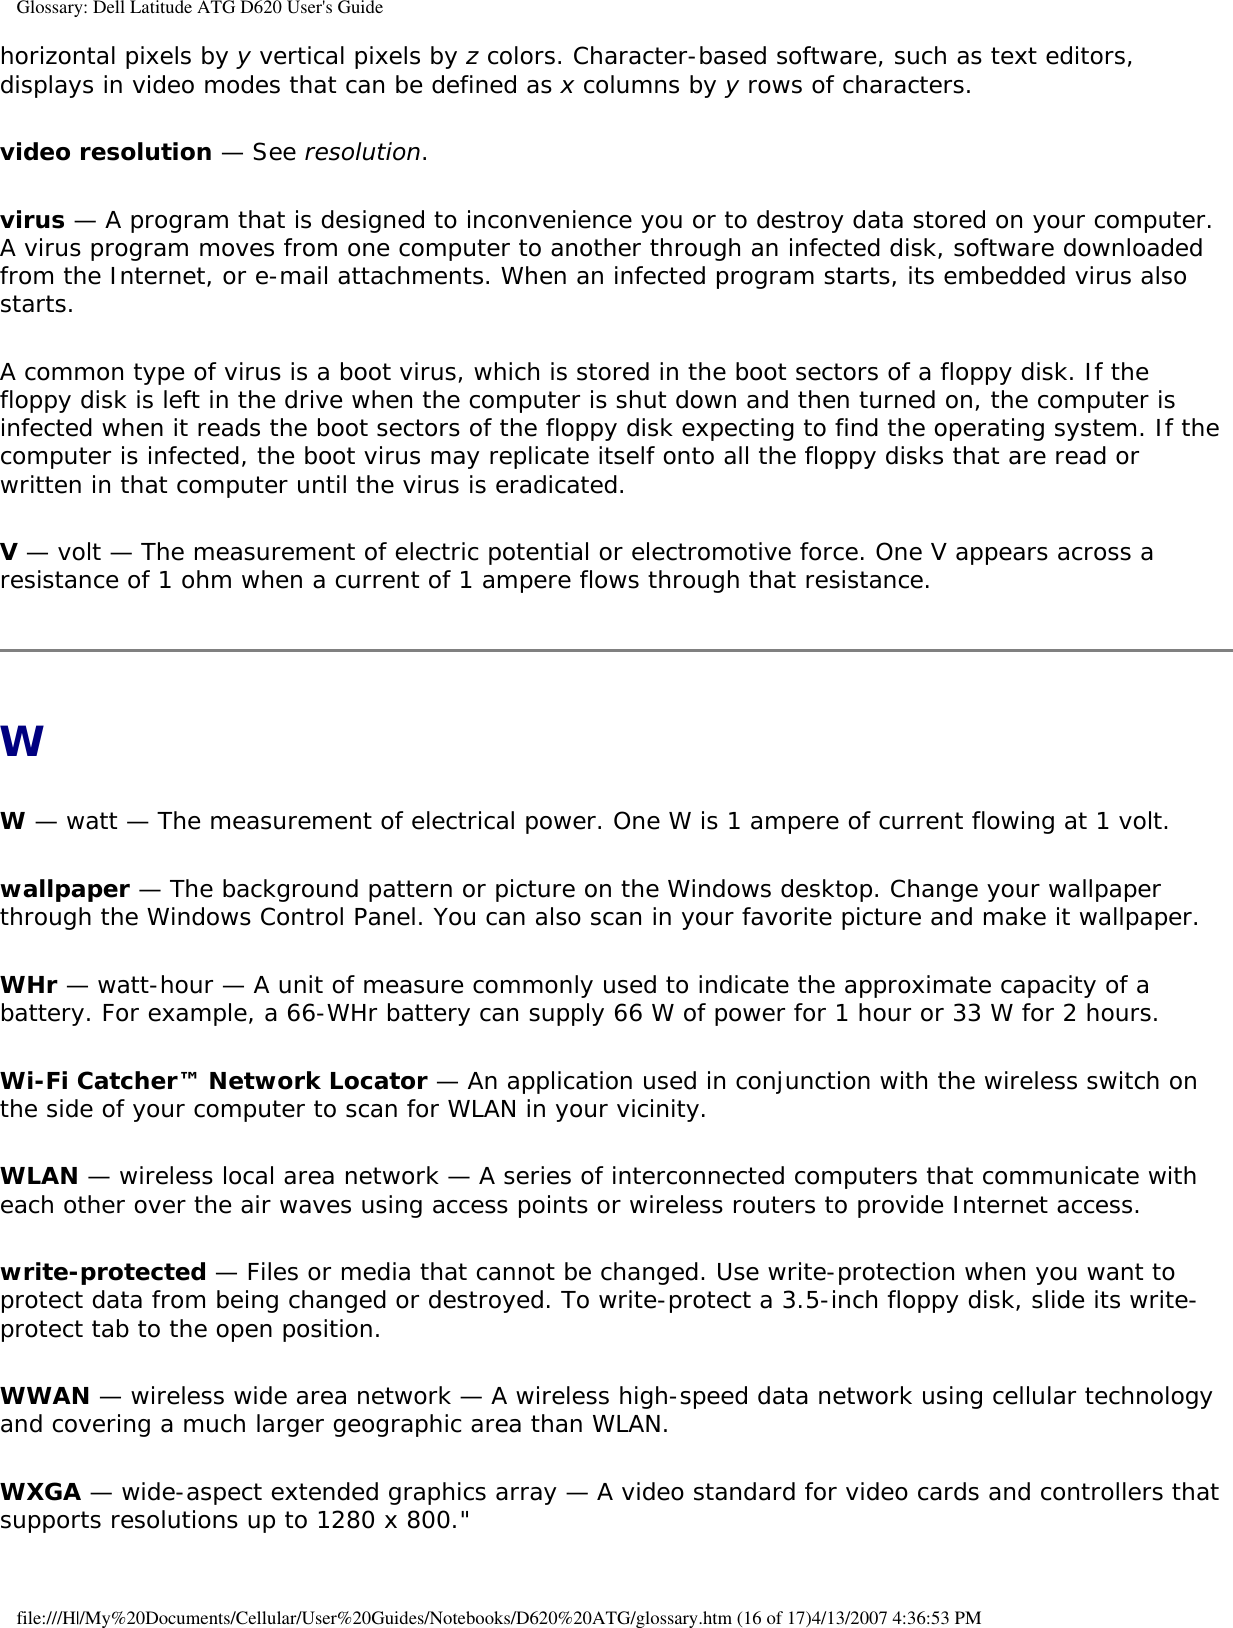 Glossary: Dell Latitude ATG D620 User&apos;s Guidehorizontal pixels by y vertical pixels by z colors. Character-based software, such as text editors, displays in video modes that can be defined as x columns by y rows of characters.video resolution — See resolution.virus — A program that is designed to inconvenience you or to destroy data stored on your computer. A virus program moves from one computer to another through an infected disk, software downloaded from the Internet, or e-mail attachments. When an infected program starts, its embedded virus also starts.A common type of virus is a boot virus, which is stored in the boot sectors of a floppy disk. If the floppy disk is left in the drive when the computer is shut down and then turned on, the computer is infected when it reads the boot sectors of the floppy disk expecting to find the operating system. If the computer is infected, the boot virus may replicate itself onto all the floppy disks that are read or written in that computer until the virus is eradicated.V — volt — The measurement of electric potential or electromotive force. One V appears across a resistance of 1 ohm when a current of 1 ampere flows through that resistance.WW — watt — The measurement of electrical power. One W is 1 ampere of current flowing at 1 volt.wallpaper — The background pattern or picture on the Windows desktop. Change your wallpaper through the Windows Control Panel. You can also scan in your favorite picture and make it wallpaper.WHr — watt-hour — A unit of measure commonly used to indicate the approximate capacity of a battery. For example, a 66-WHr battery can supply 66 W of power for 1 hour or 33 W for 2 hours.Wi-Fi Catcher™ Network Locator — An application used in conjunction with the wireless switch on the side of your computer to scan for WLAN in your vicinity.WLAN — wireless local area network — A series of interconnected computers that communicate with each other over the air waves using access points or wireless routers to provide Internet access.write-protected — Files or media that cannot be changed. Use write-protection when you want to protect data from being changed or destroyed. To write-protect a 3.5-inch floppy disk, slide its write-protect tab to the open position.WWAN — wireless wide area network — A wireless high-speed data network using cellular technology and covering a much larger geographic area than WLAN. WXGA — wide-aspect extended graphics array — A video standard for video cards and controllers that supports resolutions up to 1280 x 800.&quot;file:///H|/My%20Documents/Cellular/User%20Guides/Notebooks/D620%20ATG/glossary.htm (16 of 17)4/13/2007 4:36:53 PM